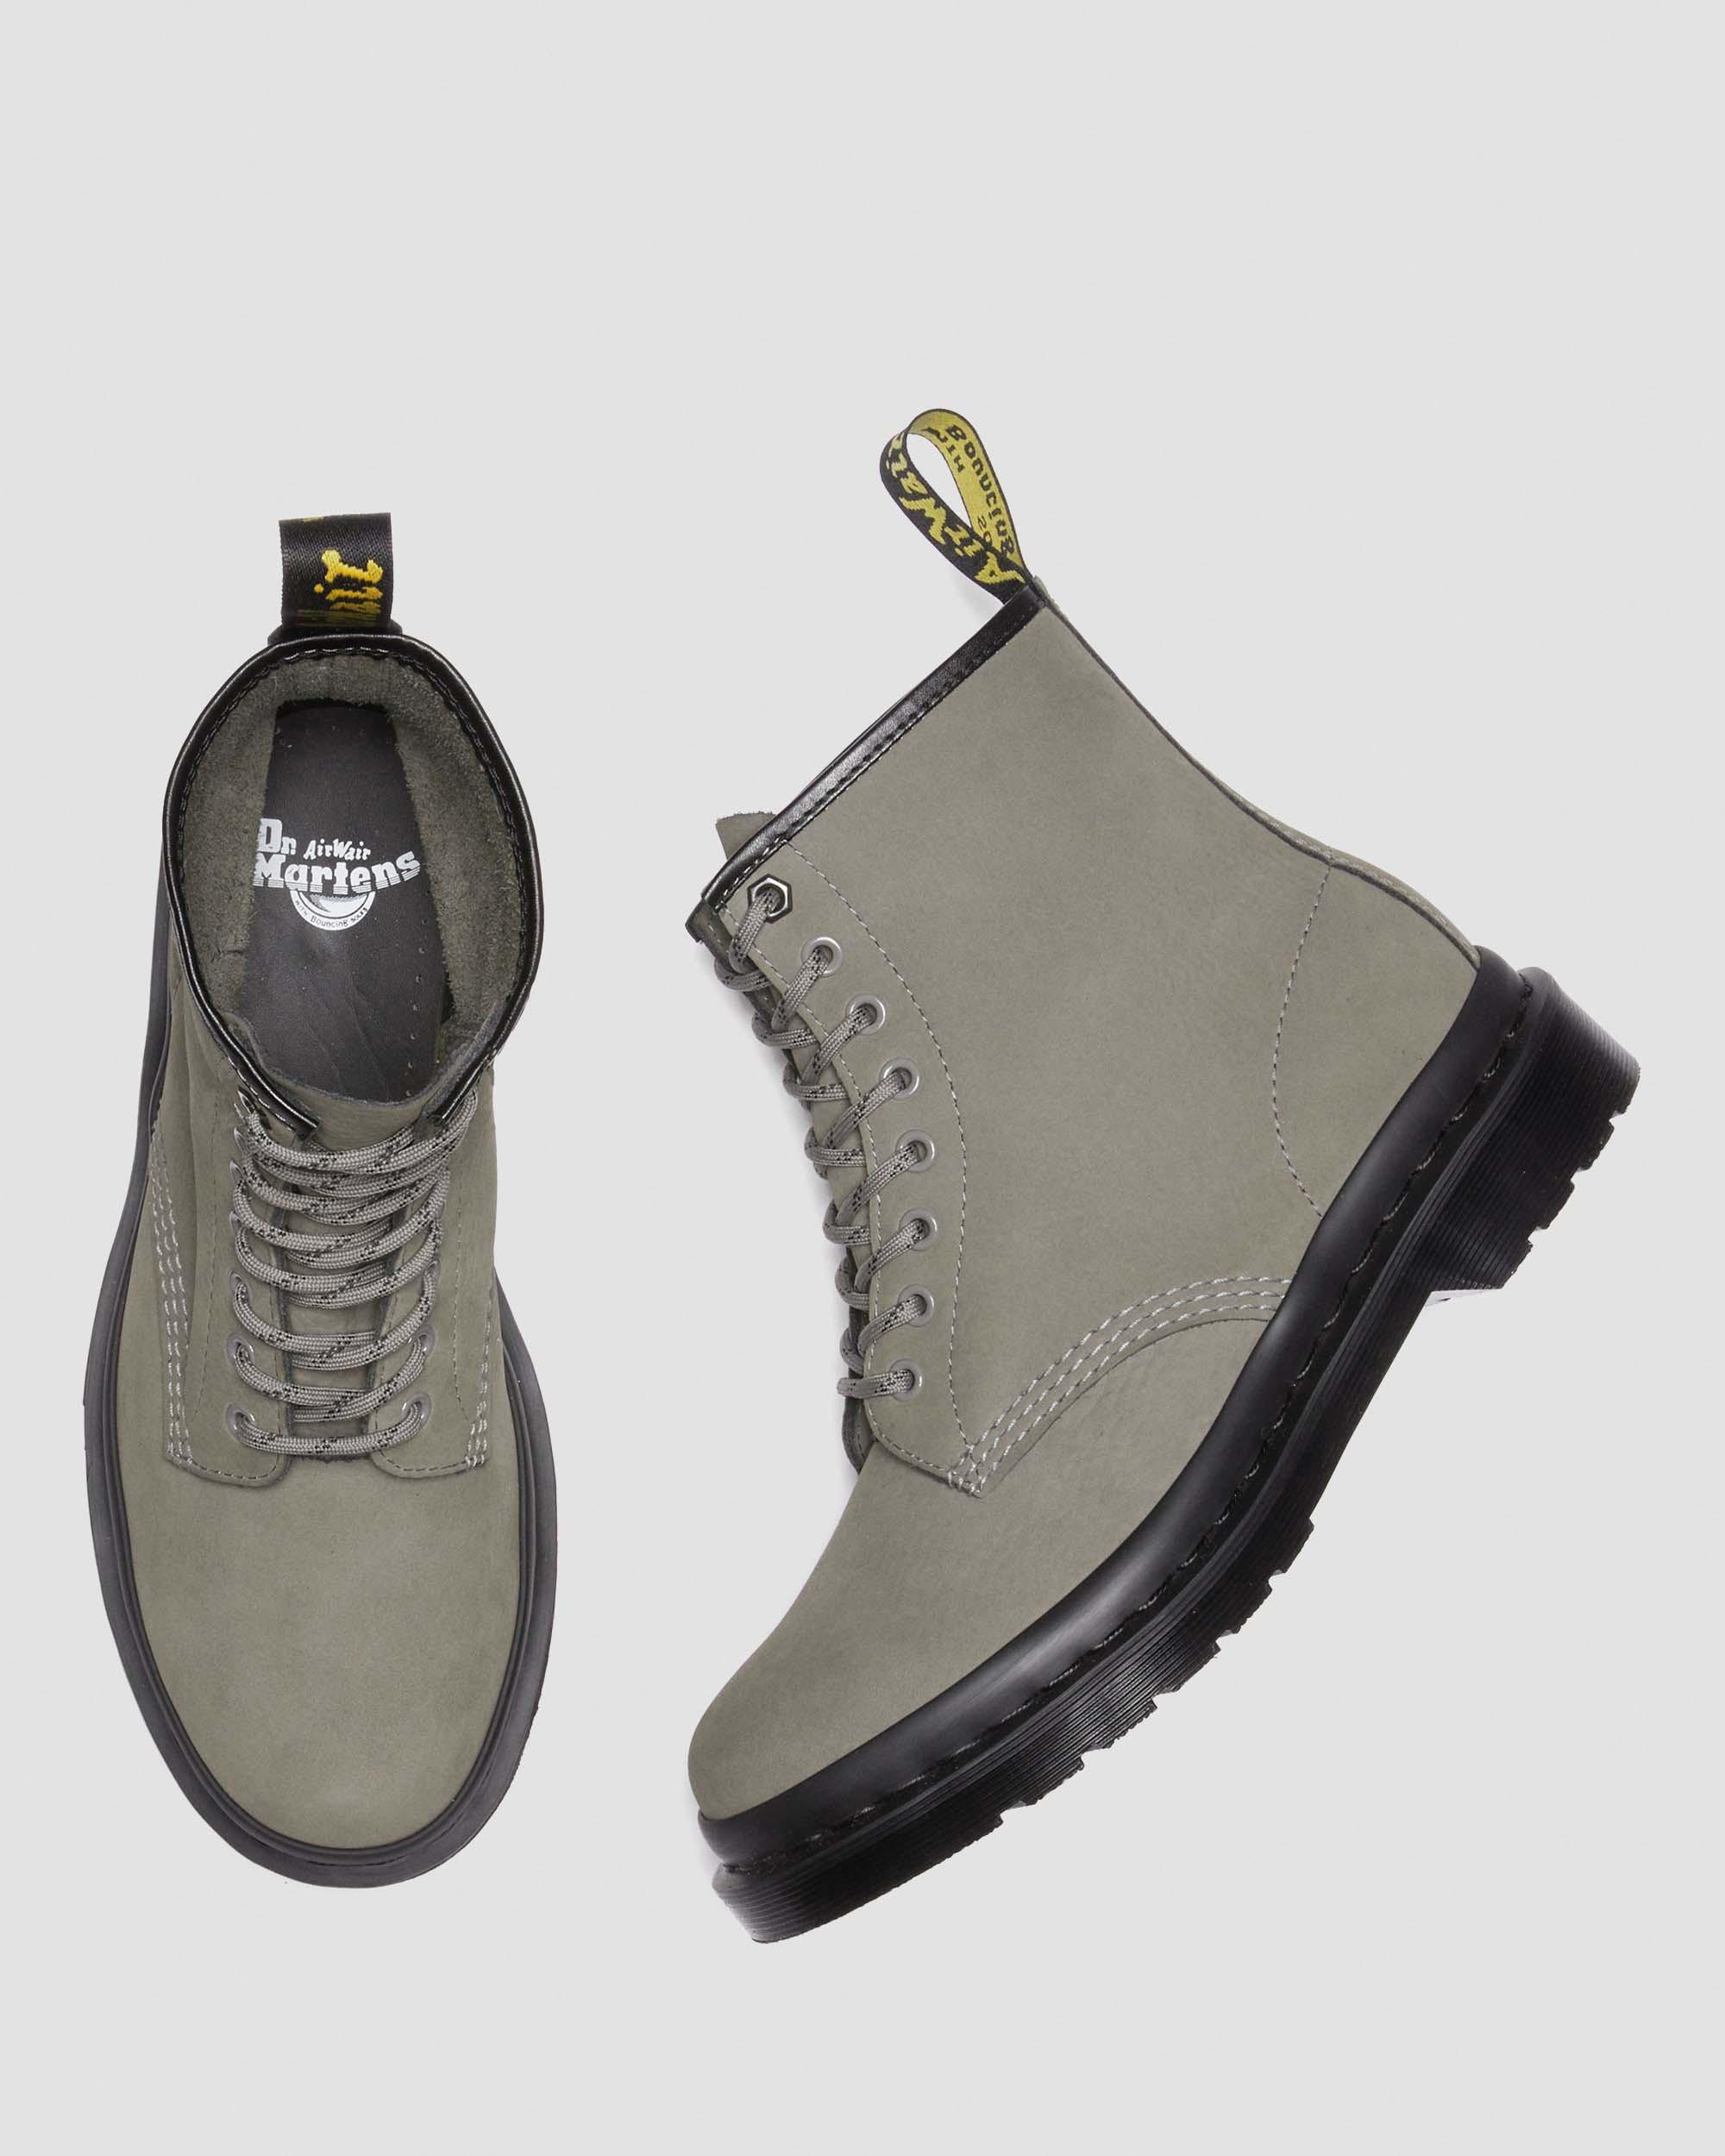 DR MARTENS 1460 Mono Milled Nubuck Lace Up Boots